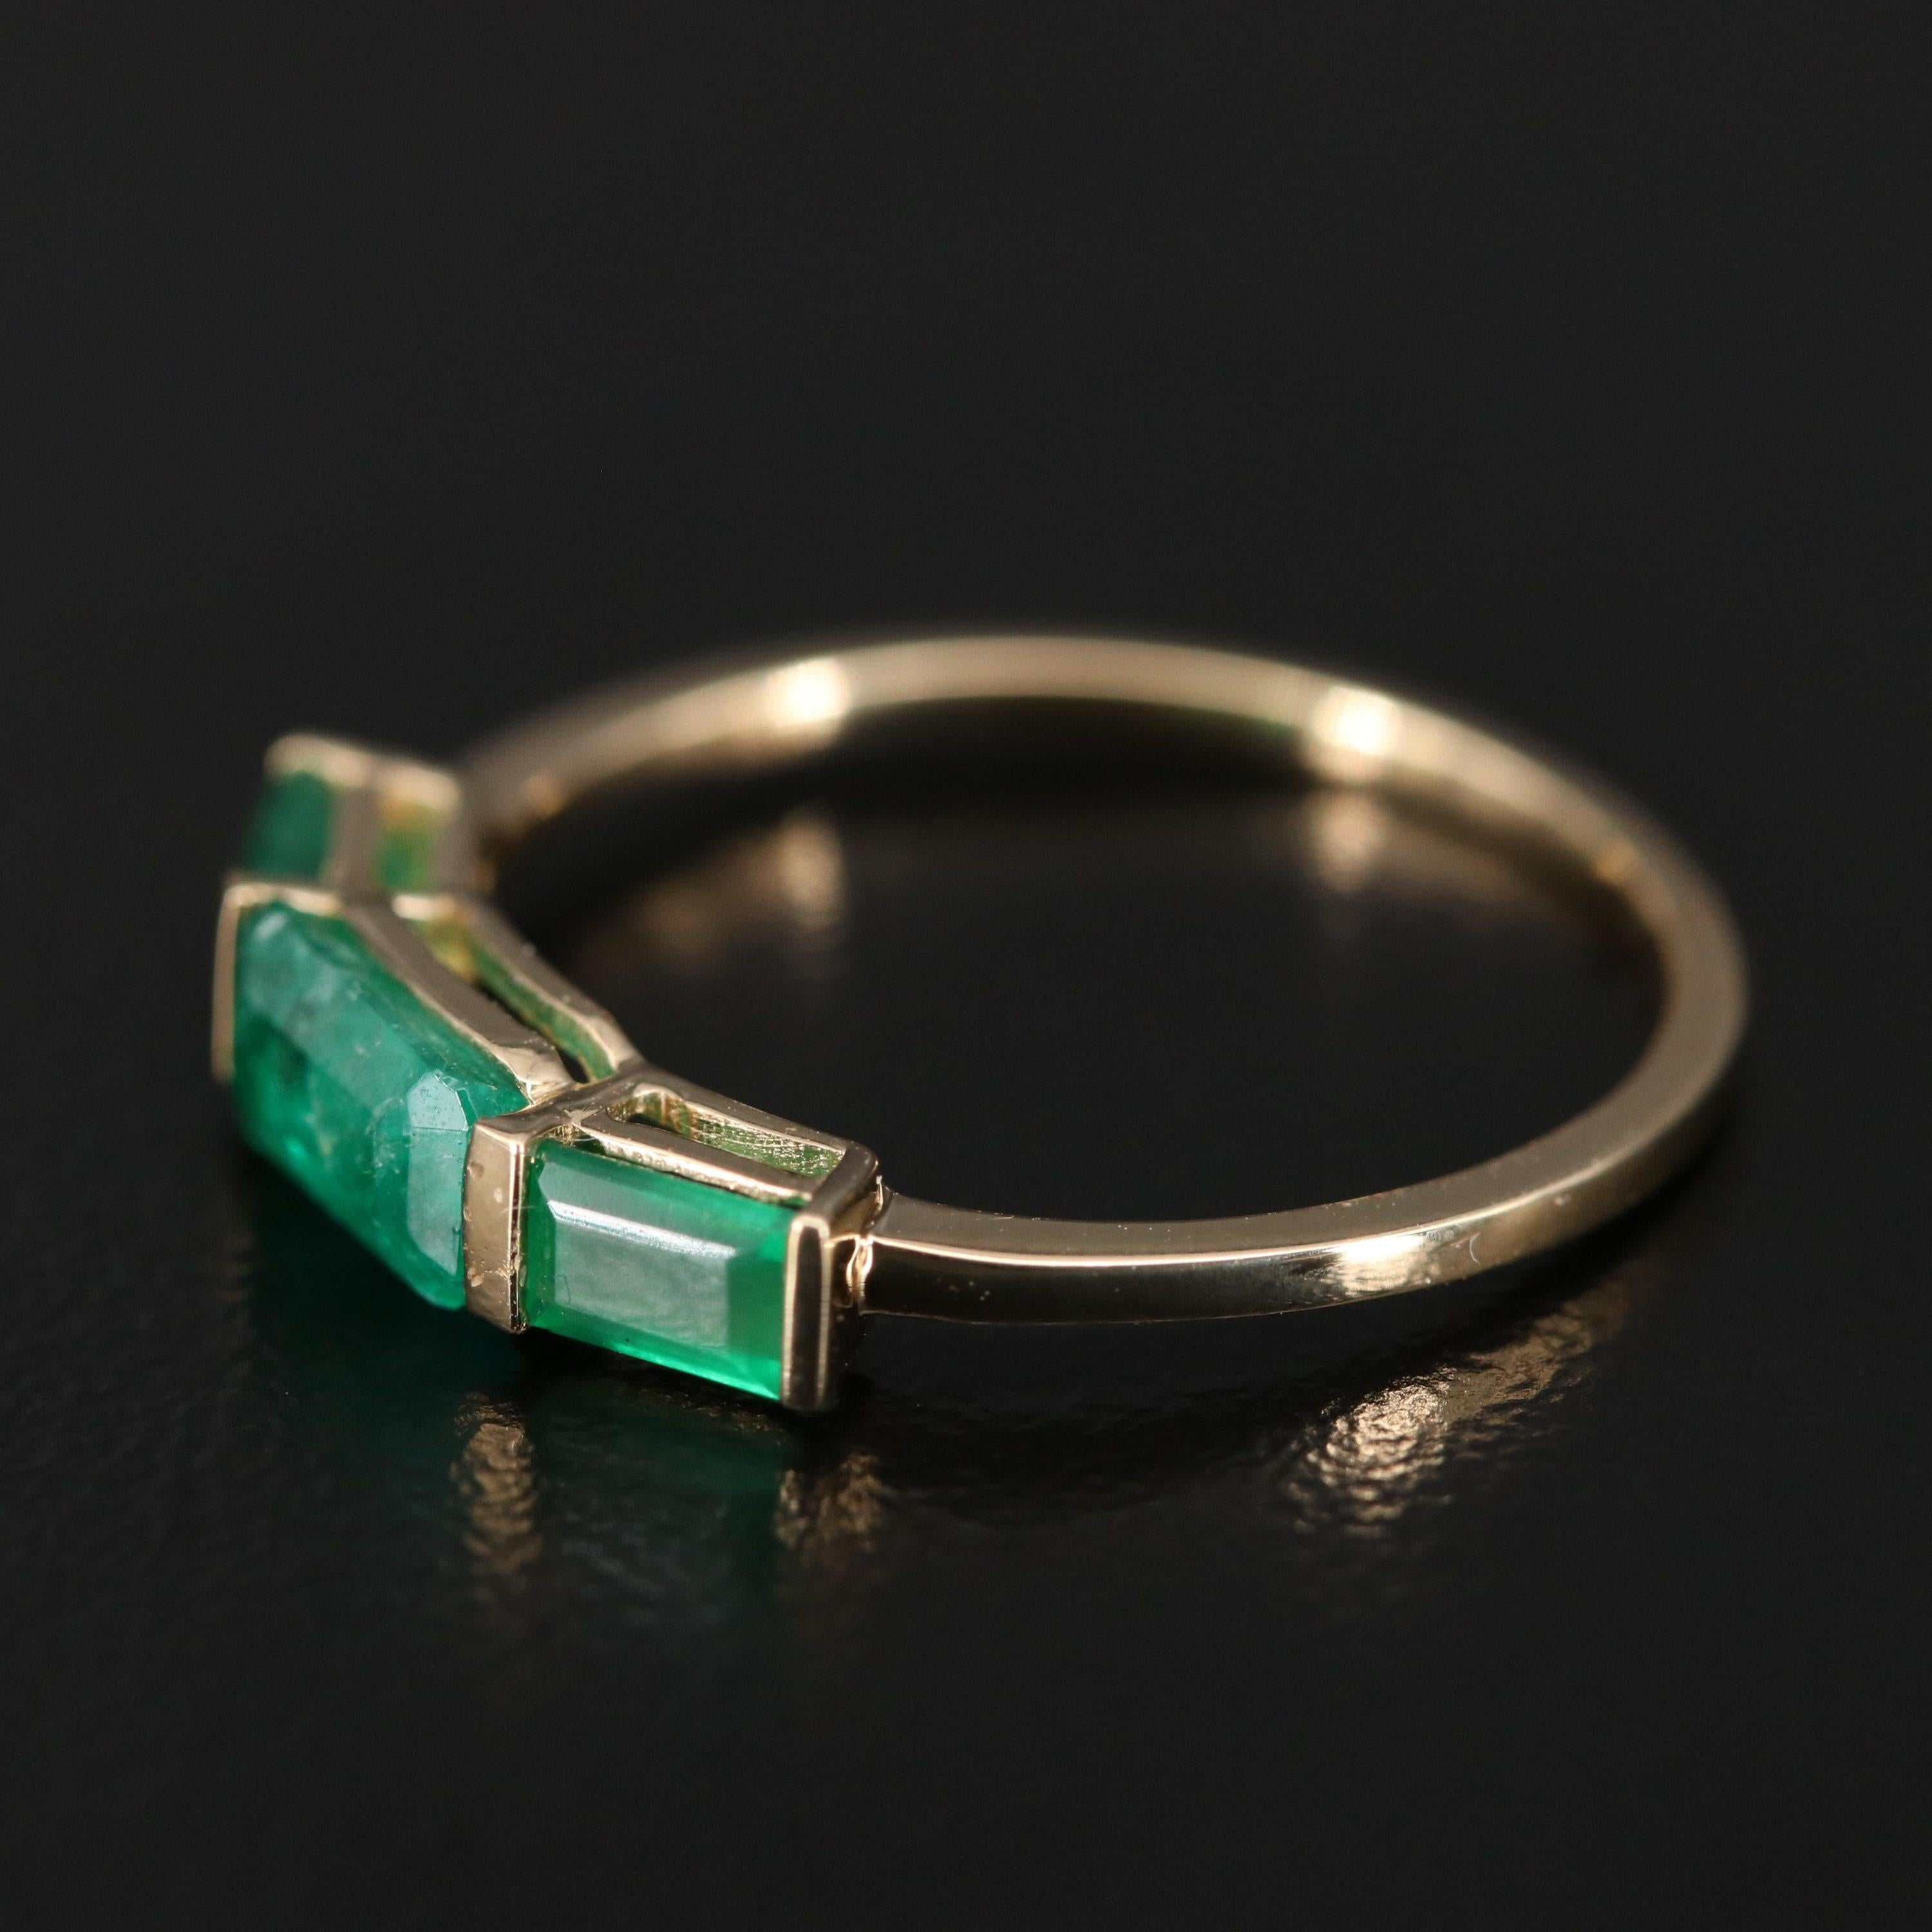 For Sale:  18K Gold 3 CT Natural Emerald Art Deco Style Engagement Ring, Fashion Band Rings 6